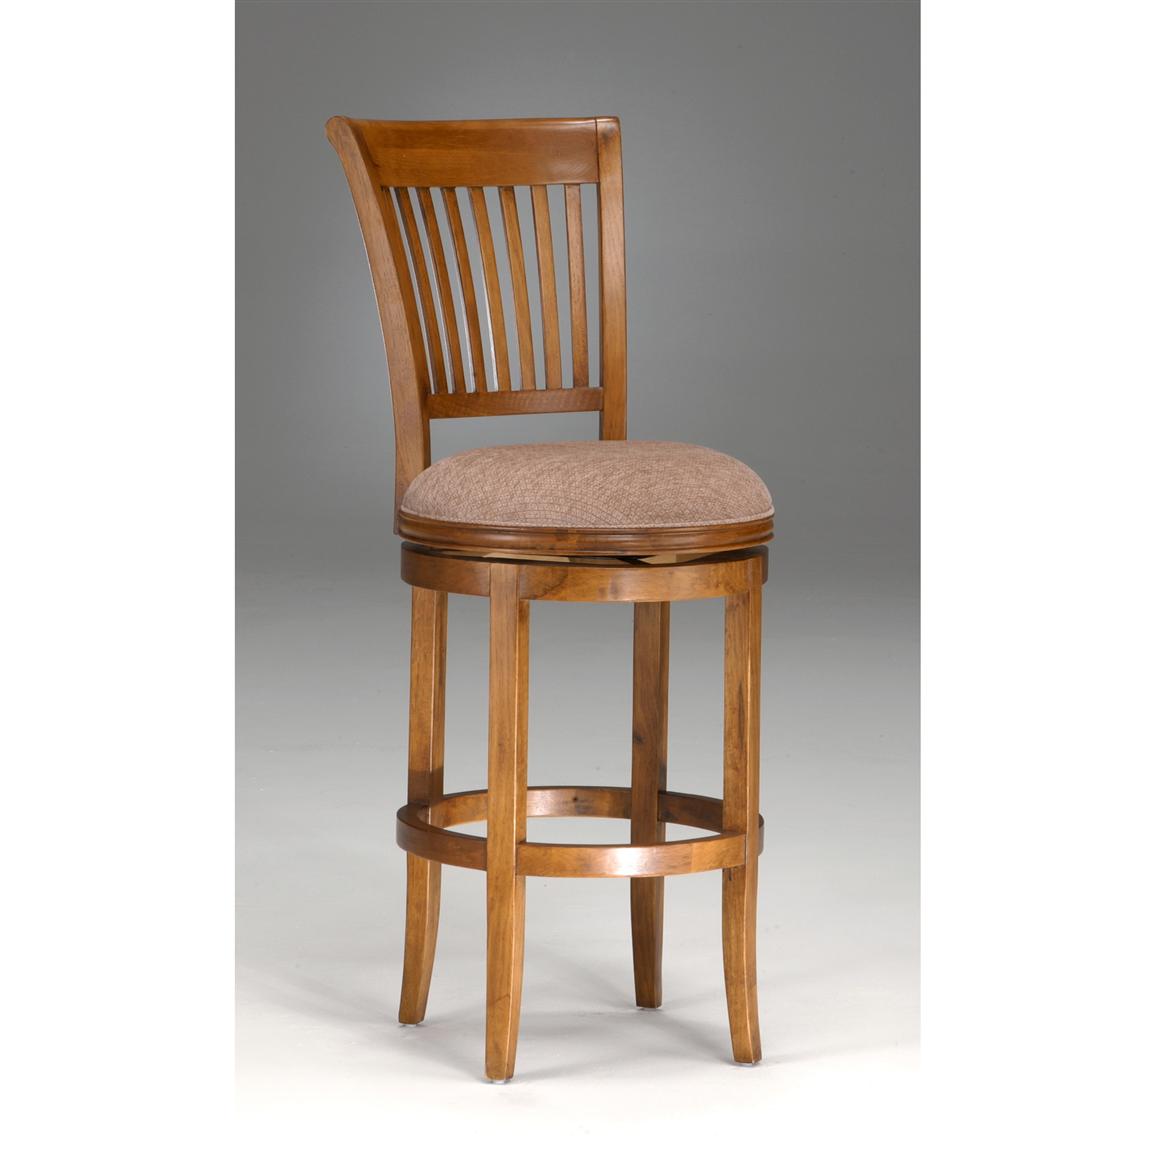 Hillsdale Oak View Swivel Bar Stool - 118160, Kitchen & Dining at Sportsman's Guide